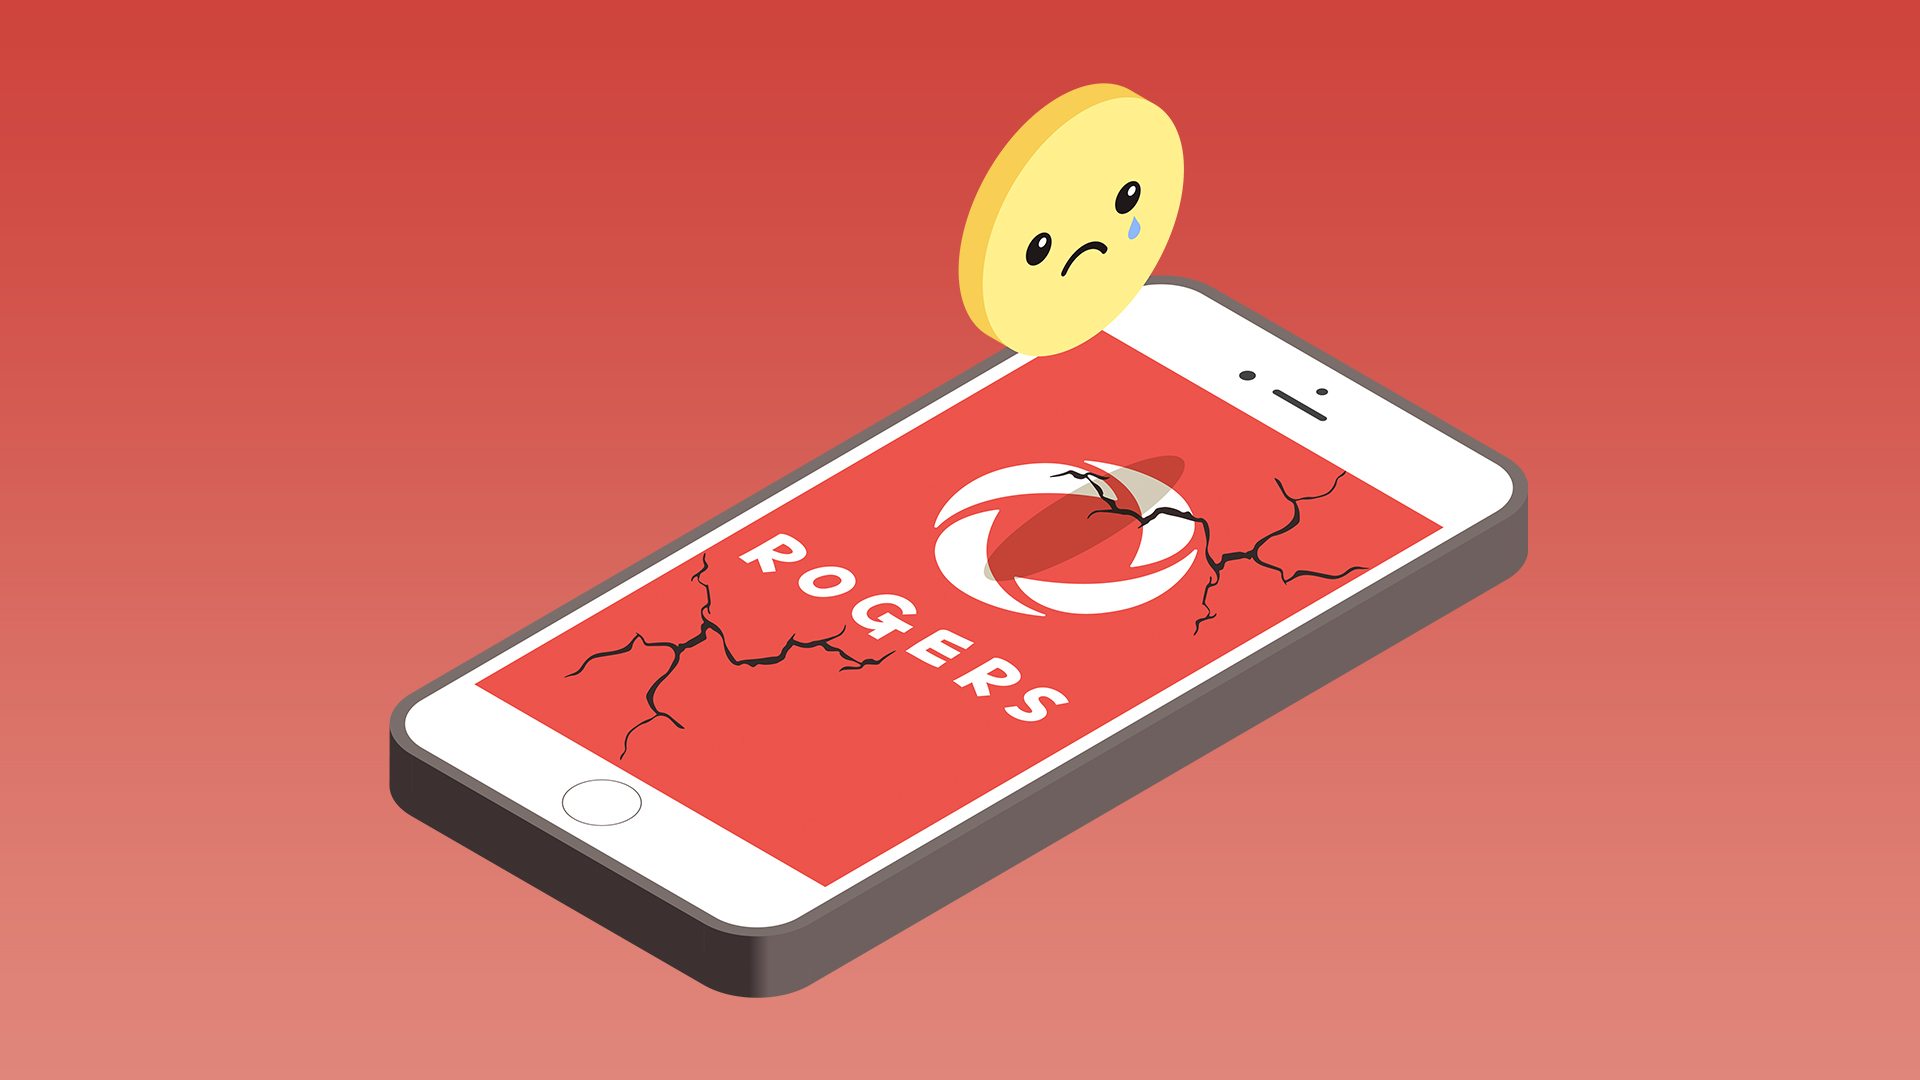 An illustration of a smartphone with the Rogers logo. The screen is cracked, revealing a LED sad face.